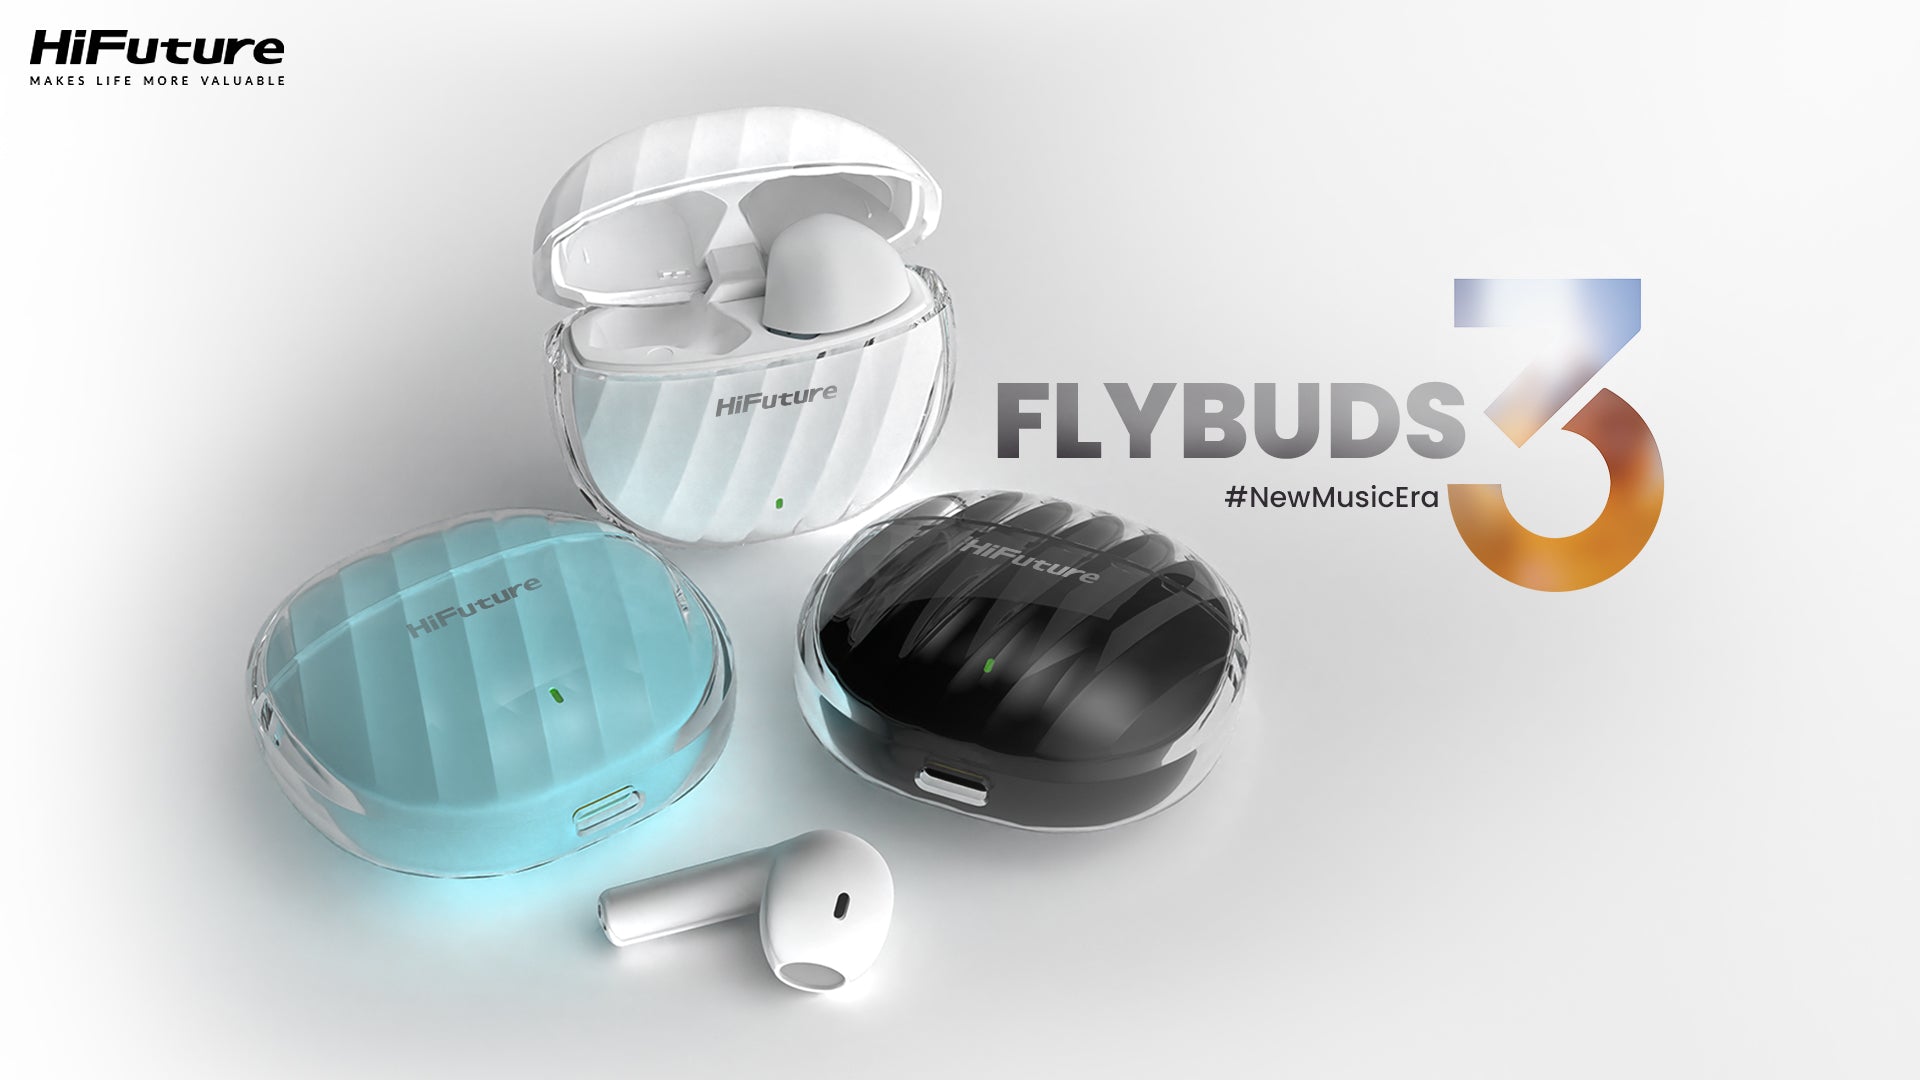 FlyBuds3 True Wireless Earbuds: One that will boggle your mind